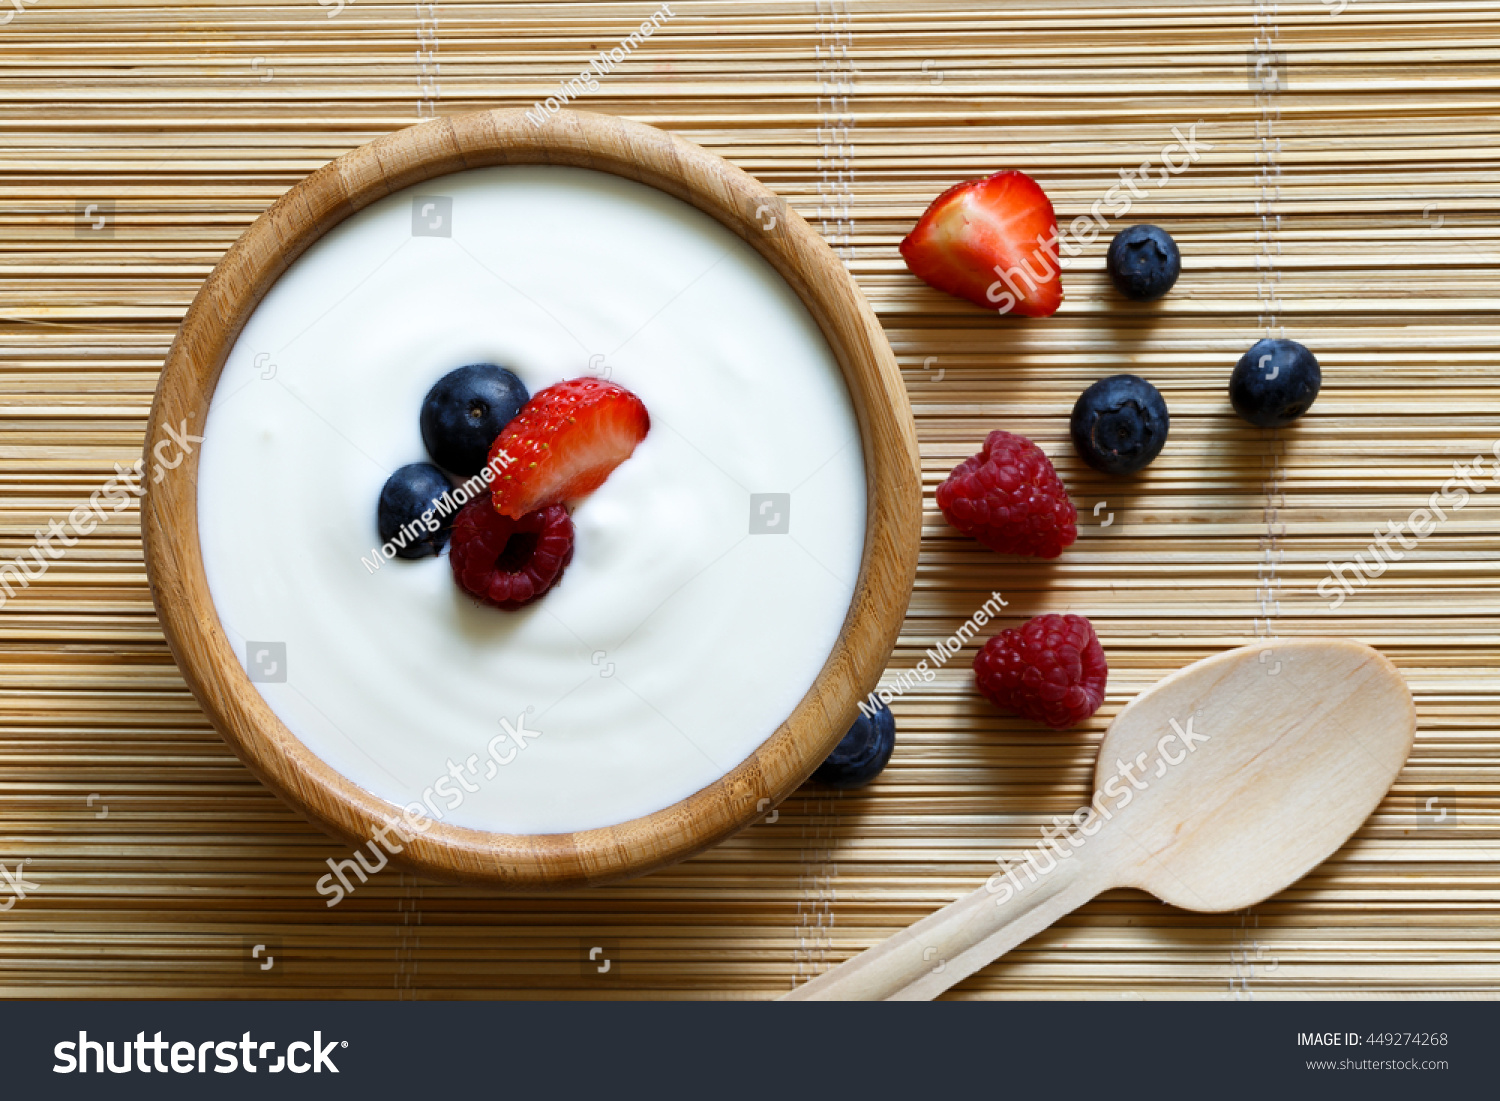 Wooden bowl of white yogurt on bamboo matt from above with wooden spoon. Next to berries. #449274268